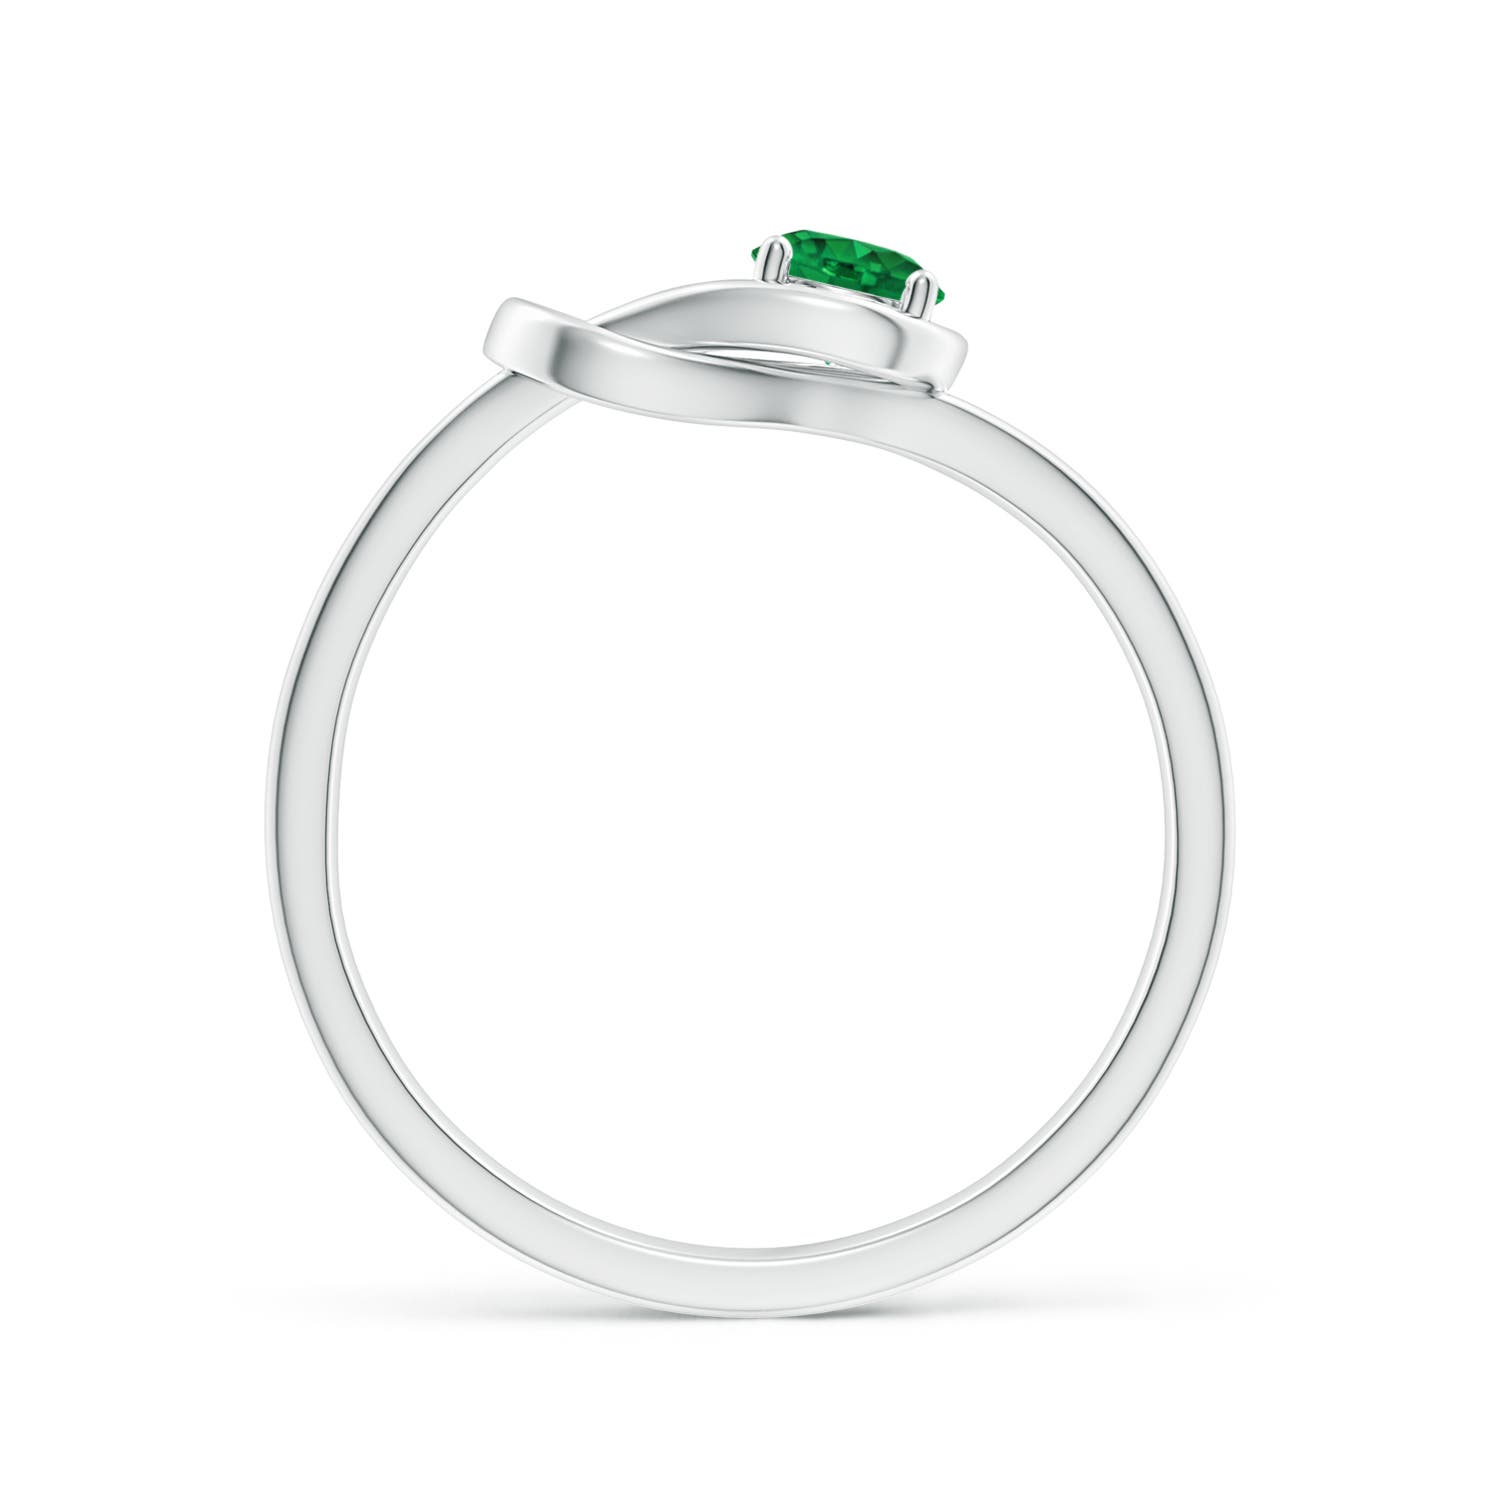 AAA - Emerald / 0.24 CT / 14 KT White Gold